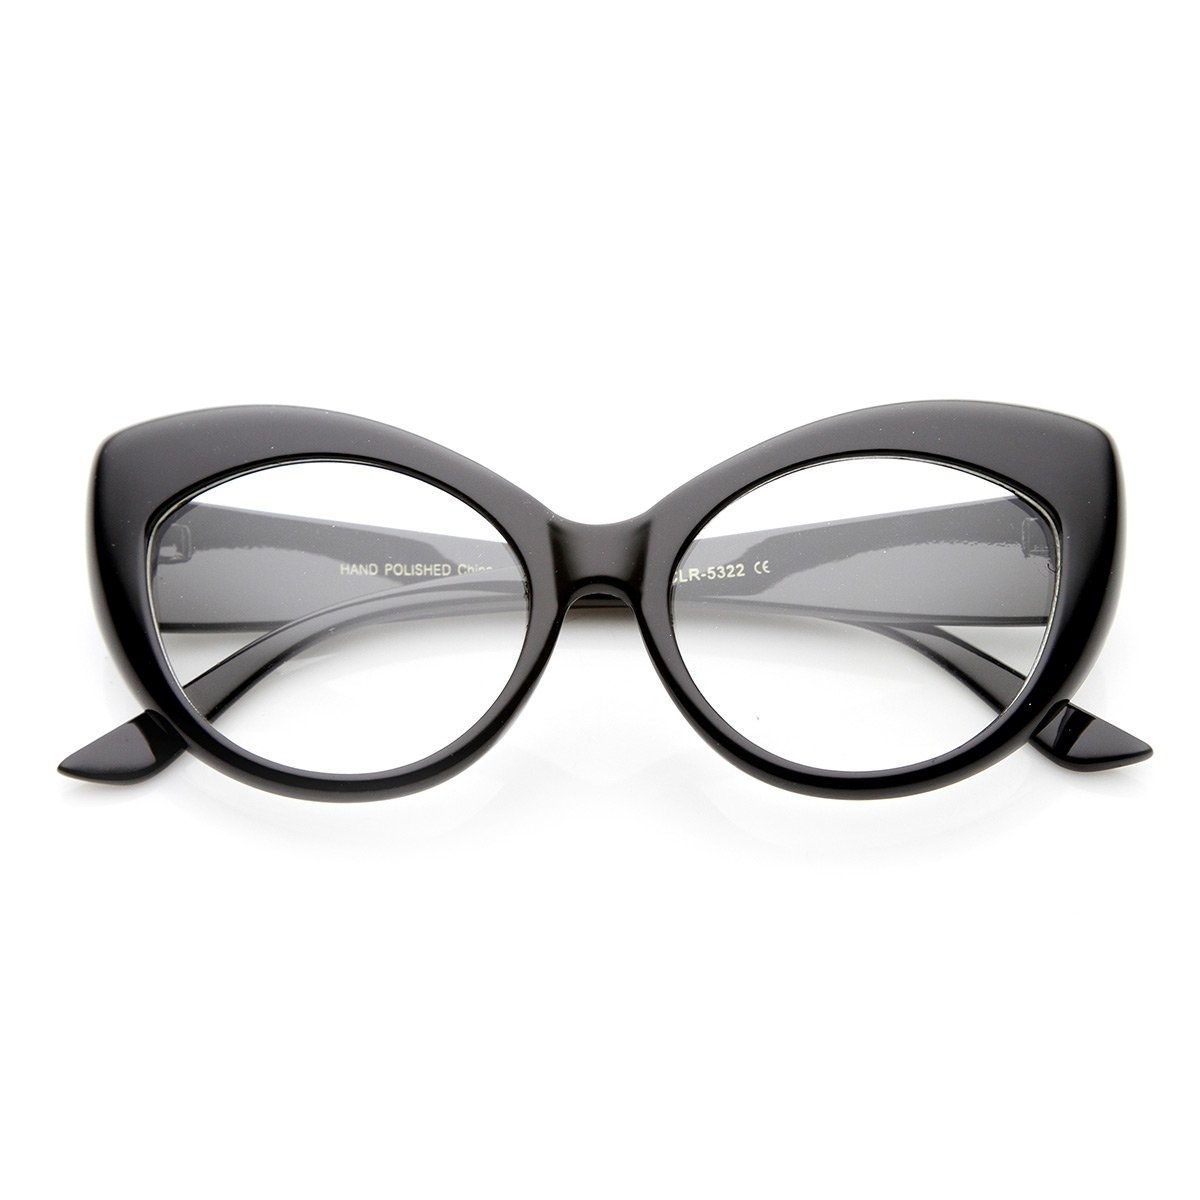 Mod Pointed Cat Eye Clear Fashion Frame Glasses - Shiny-Black Clear